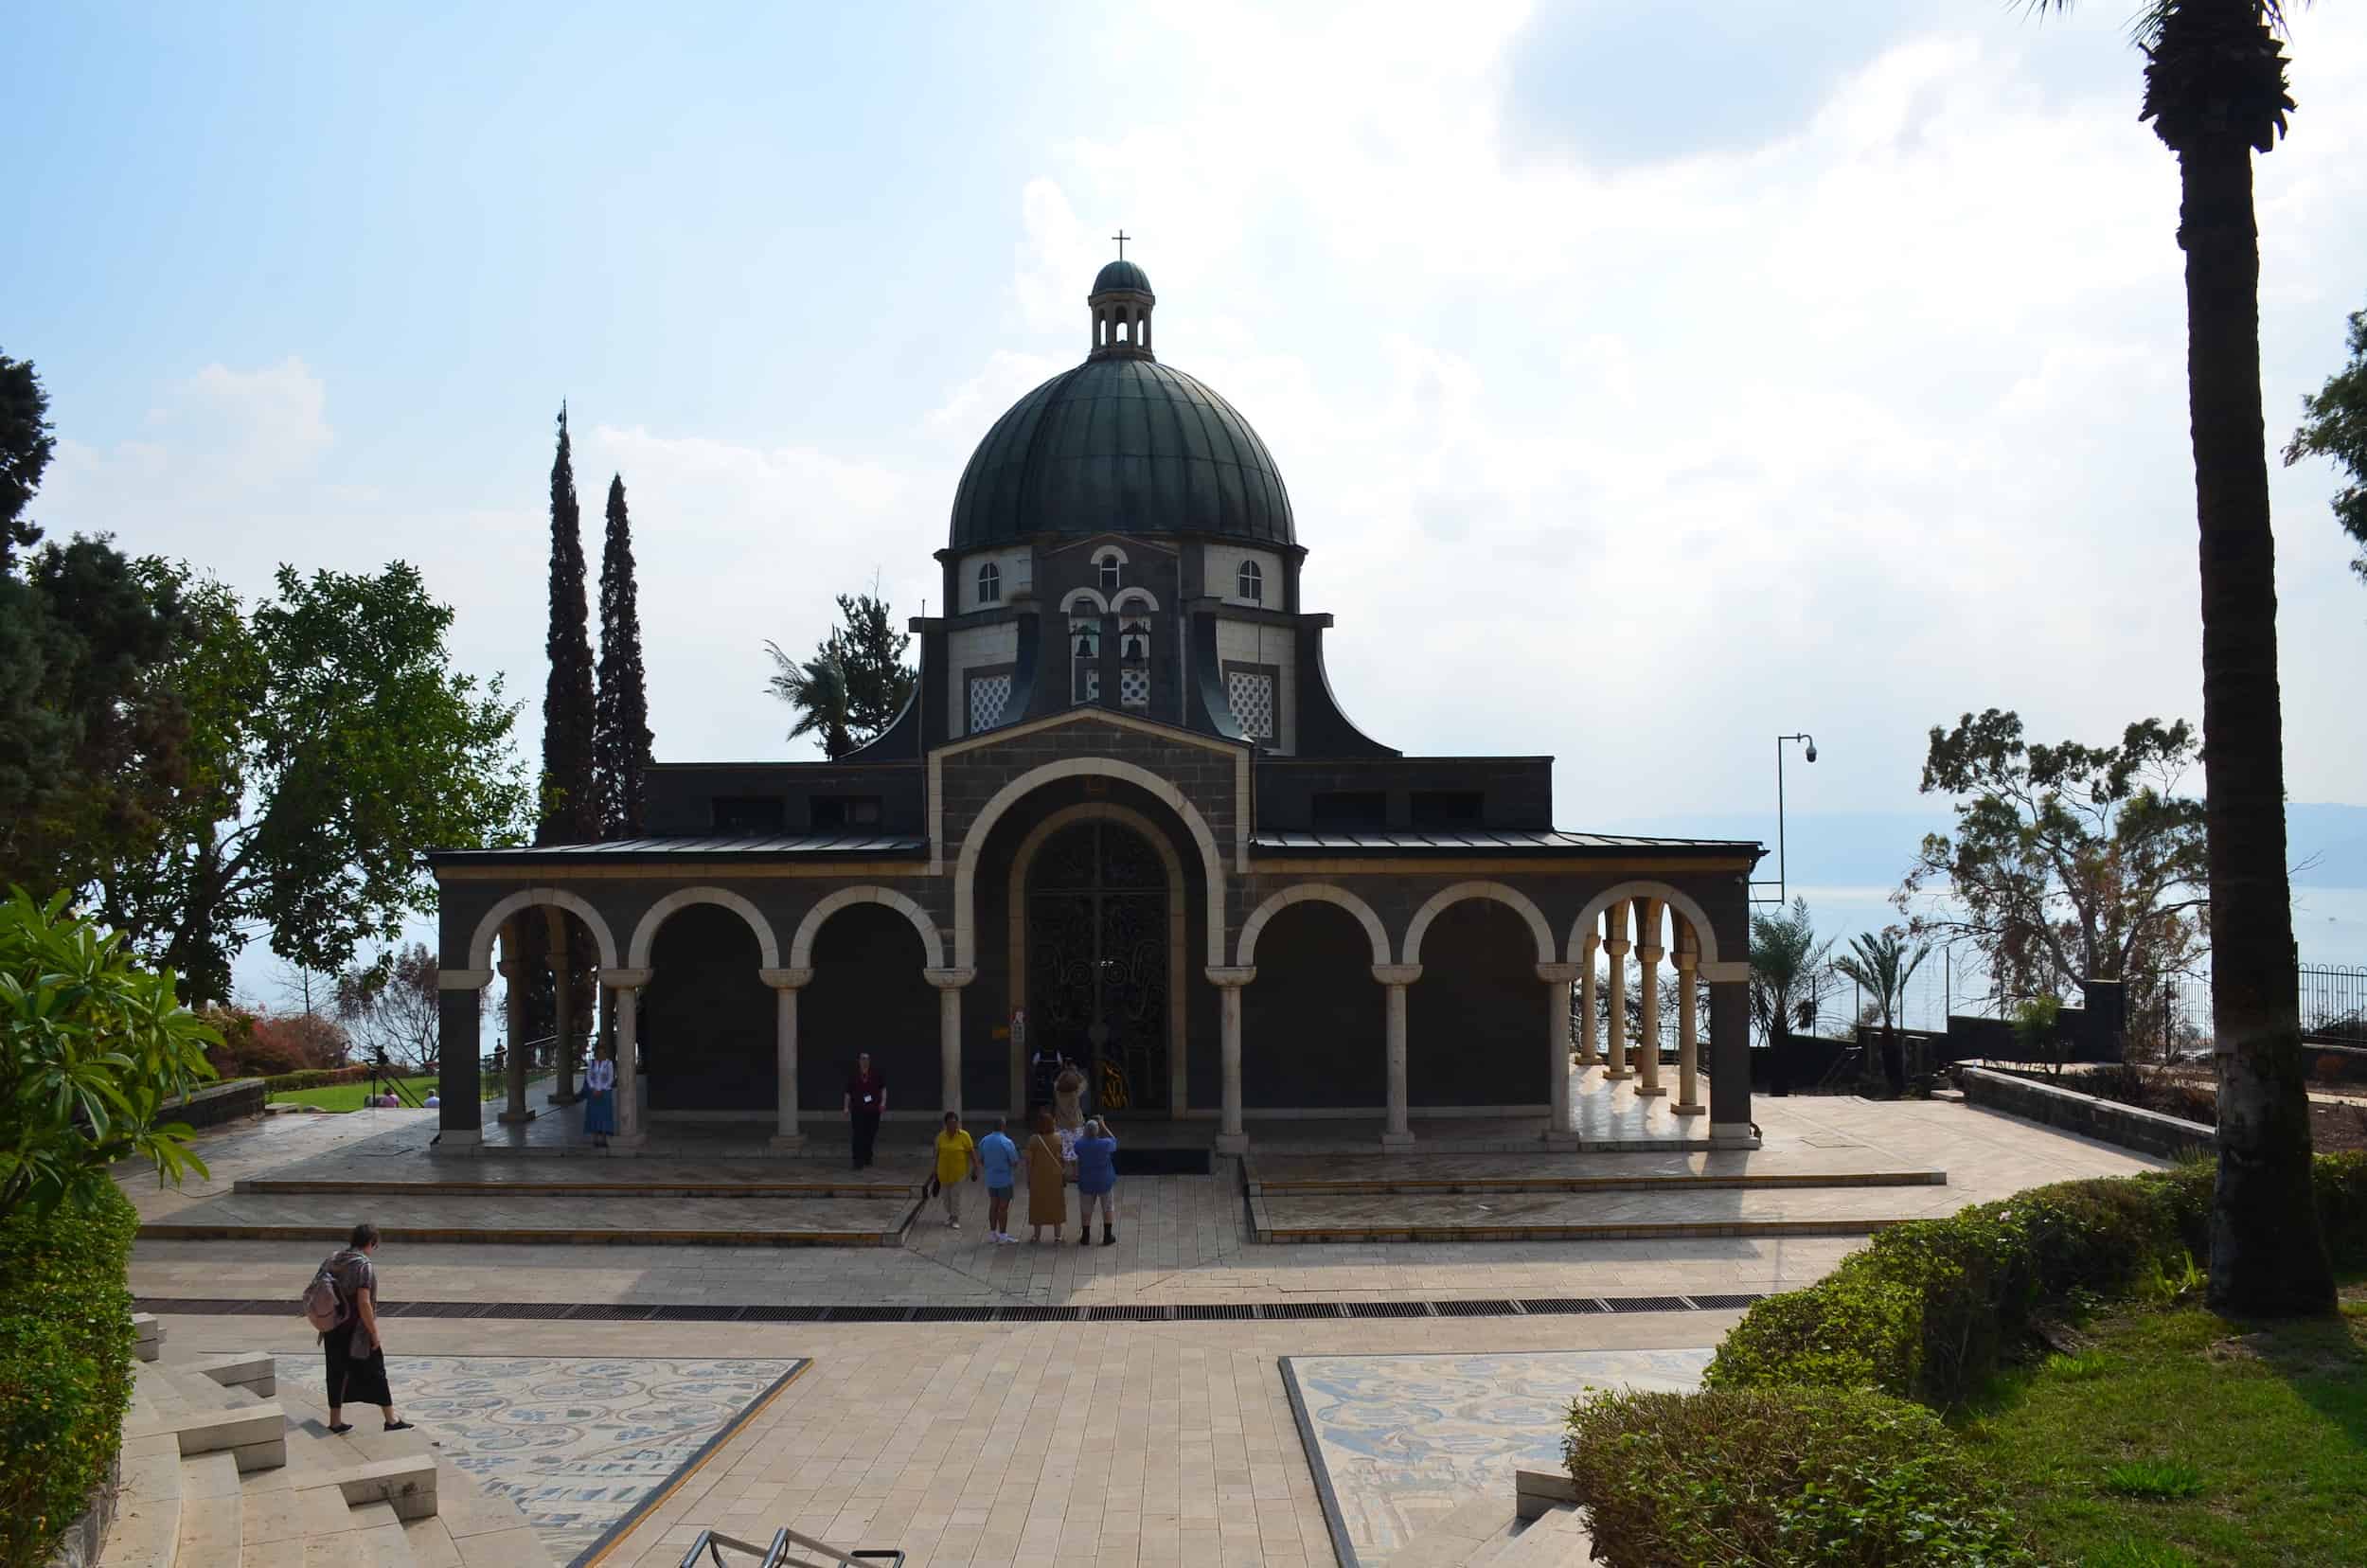 Church of the Beatitudes on the Mount of Beatitudes in Israel